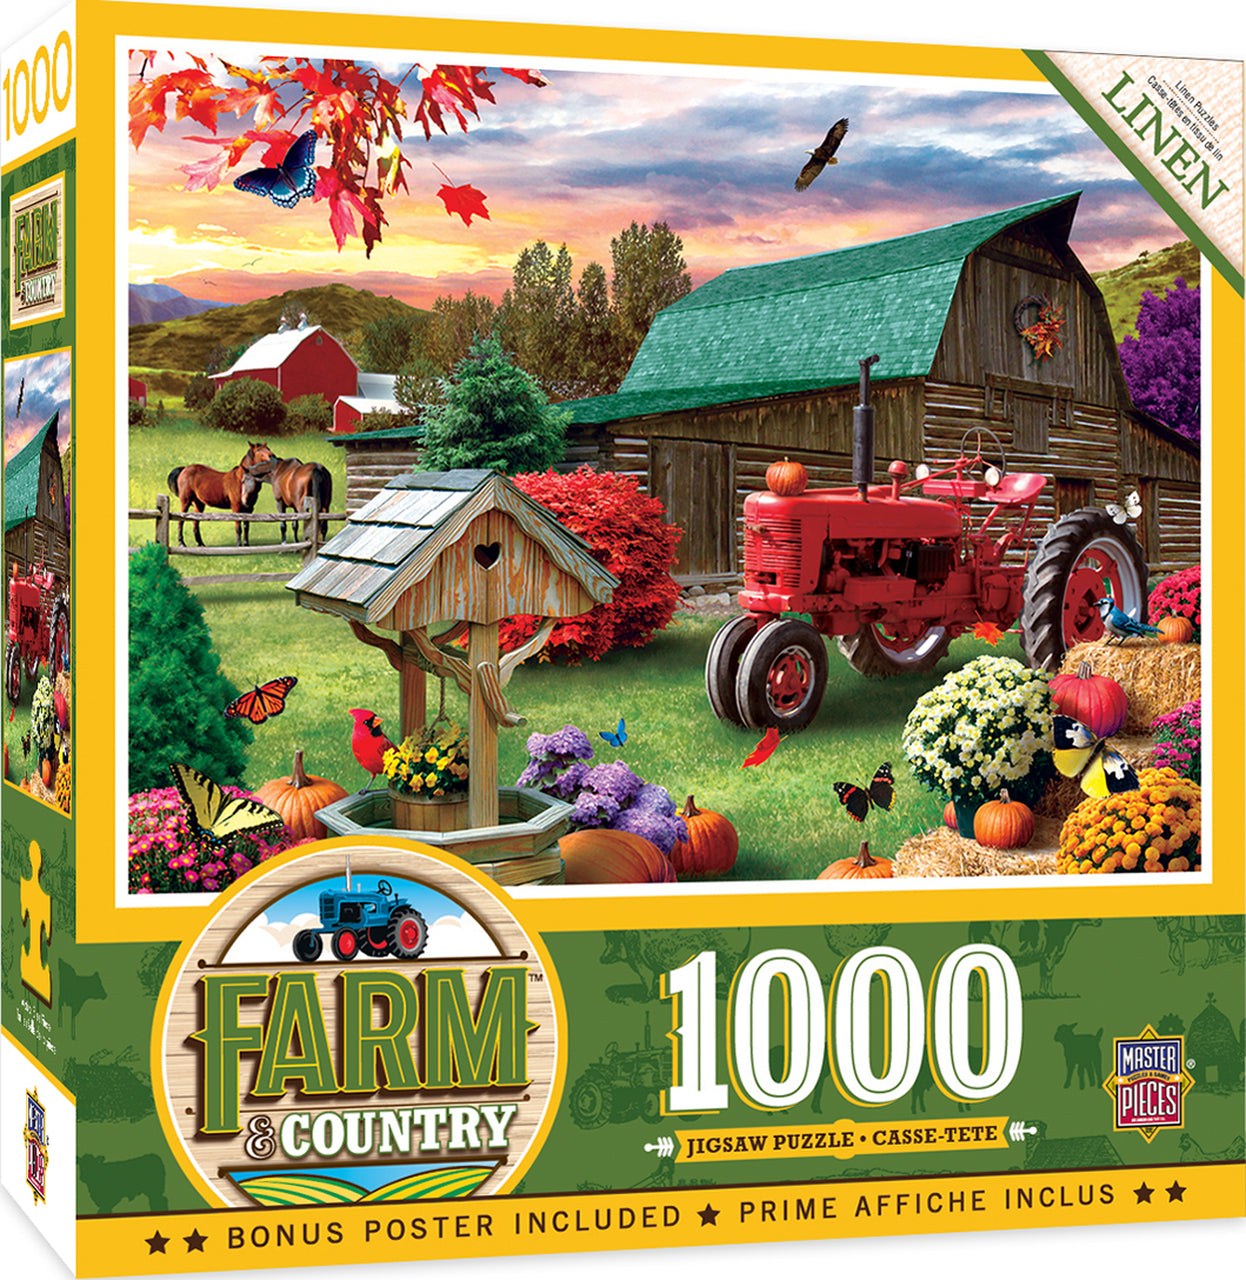 Farm Country - Harvest Ranch 1000 Piece Linen Jigsaw Puzzle by Masterpieces